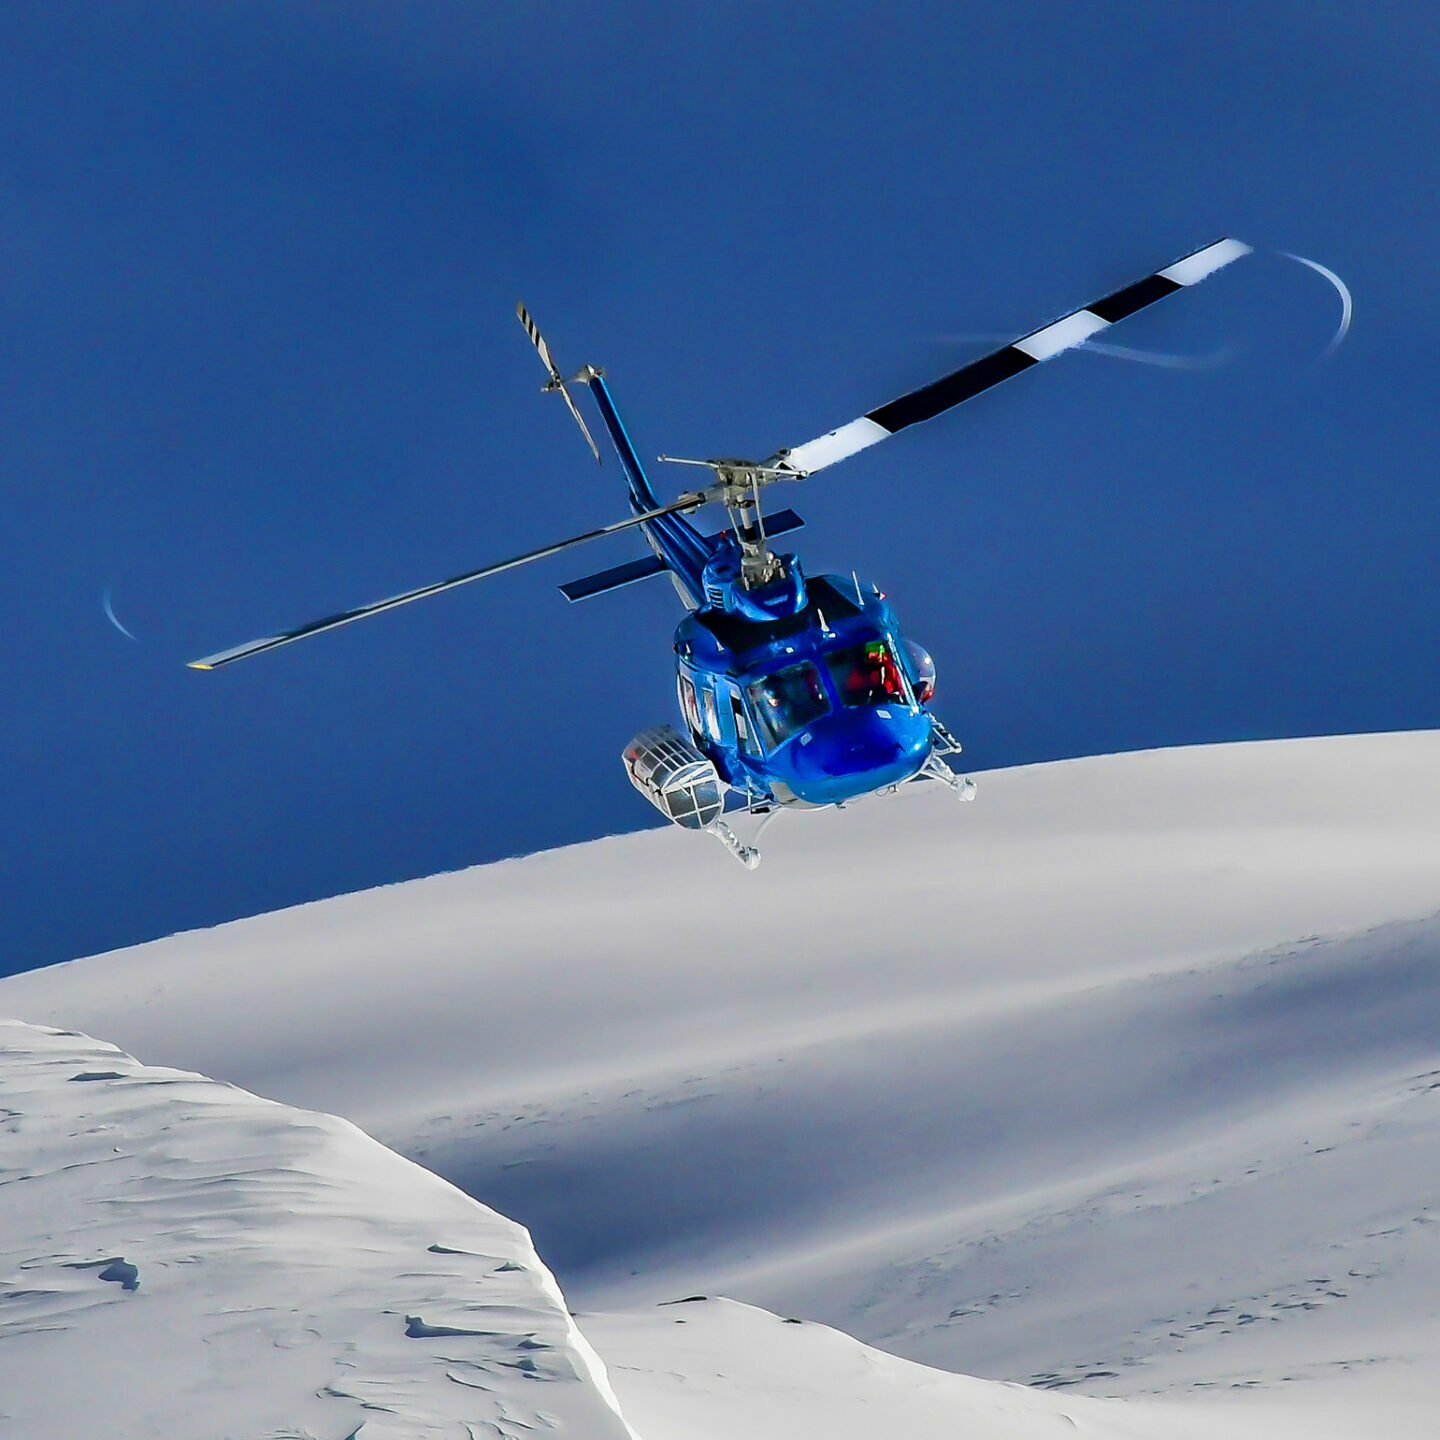 Heli-skiing and snowboarding | Crescent Spur Heli-Skiing